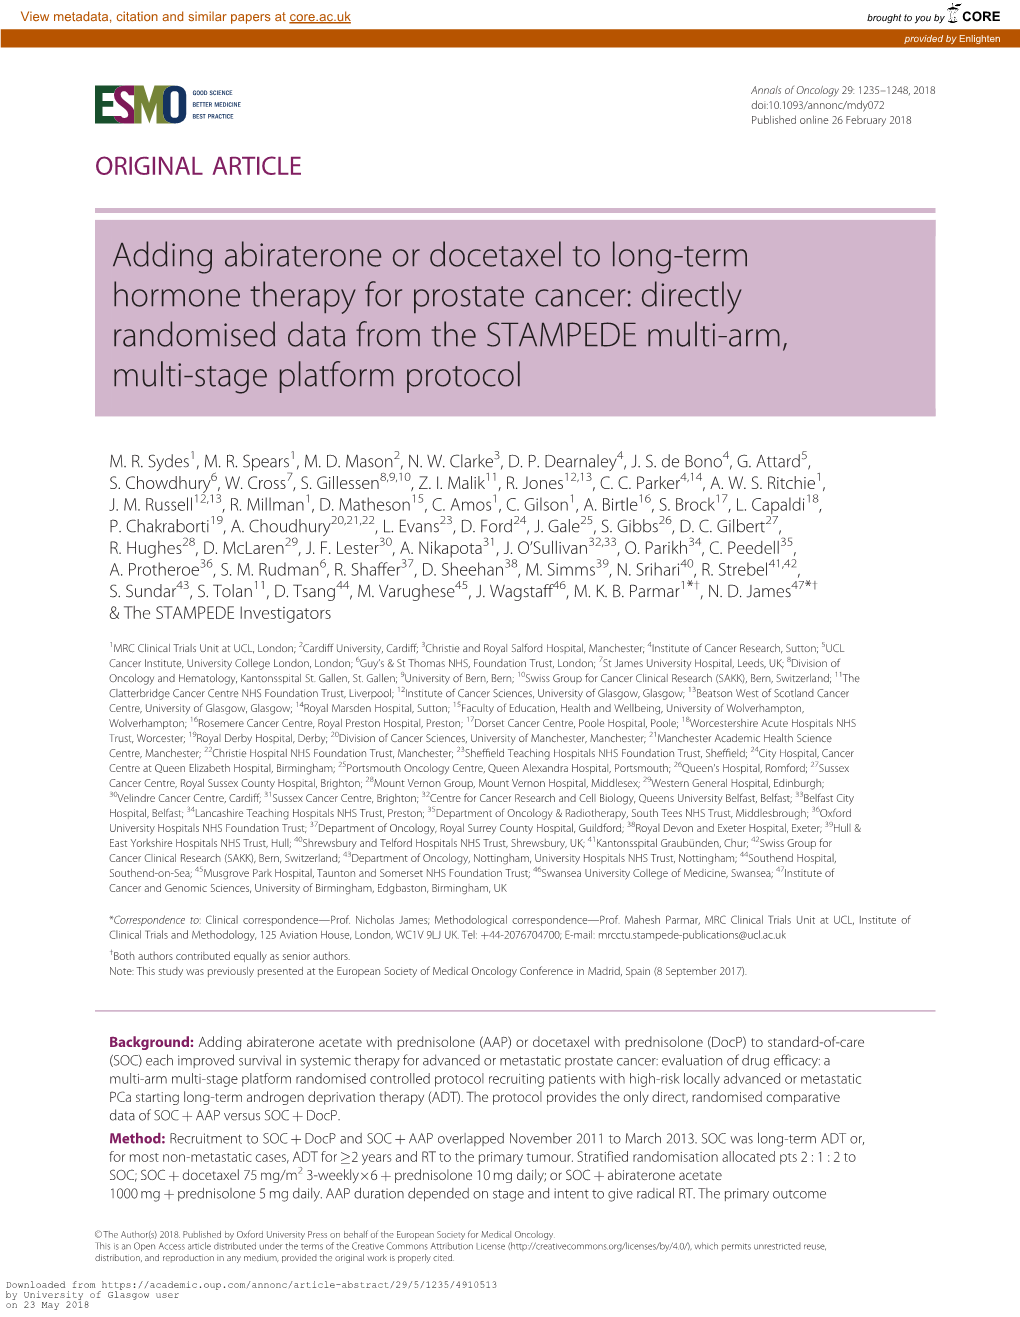 Adding Abiraterone Or Docetaxel to Long-Term Hormone Therapy for Prostate Cancer: Directly Randomised Data from the STAMPEDE Multi-Arm, Multi-Stage Platform Protocol